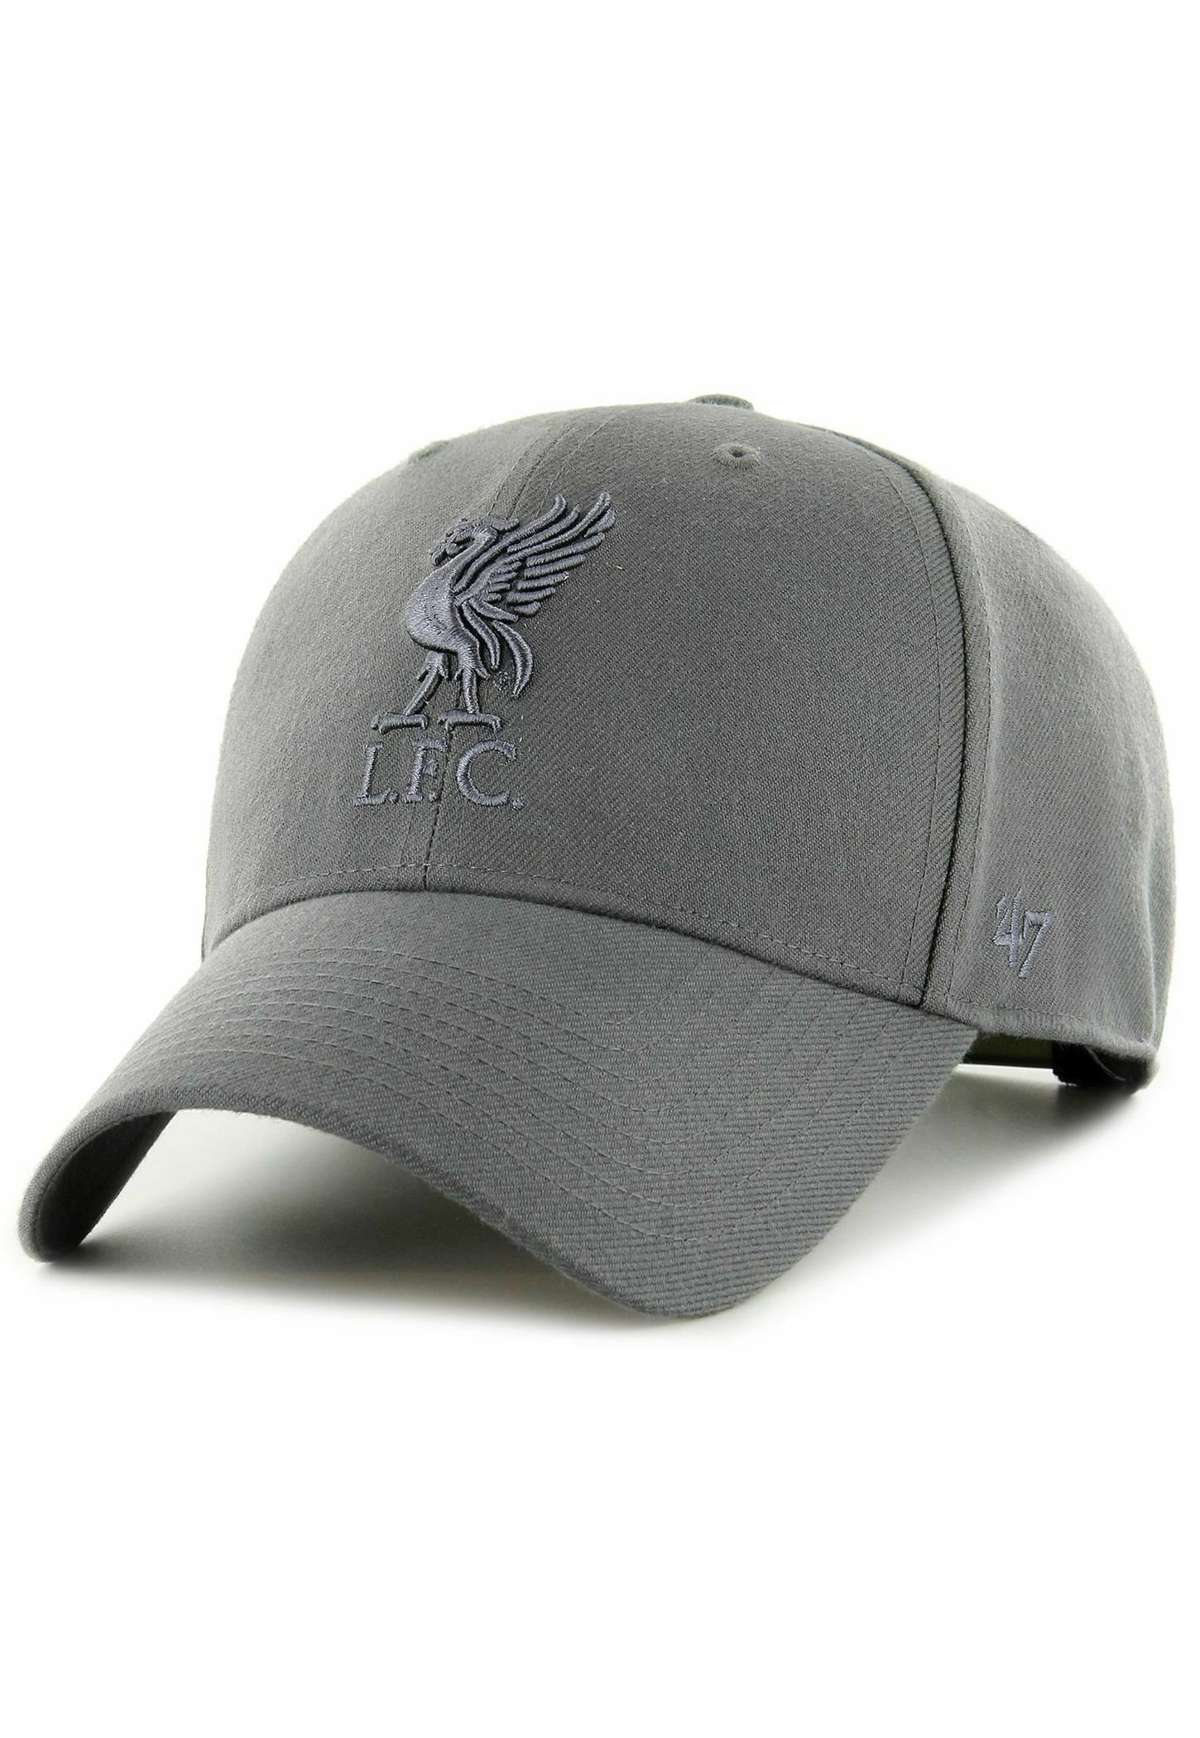 Кепка CURVED FC LIVERPOOL